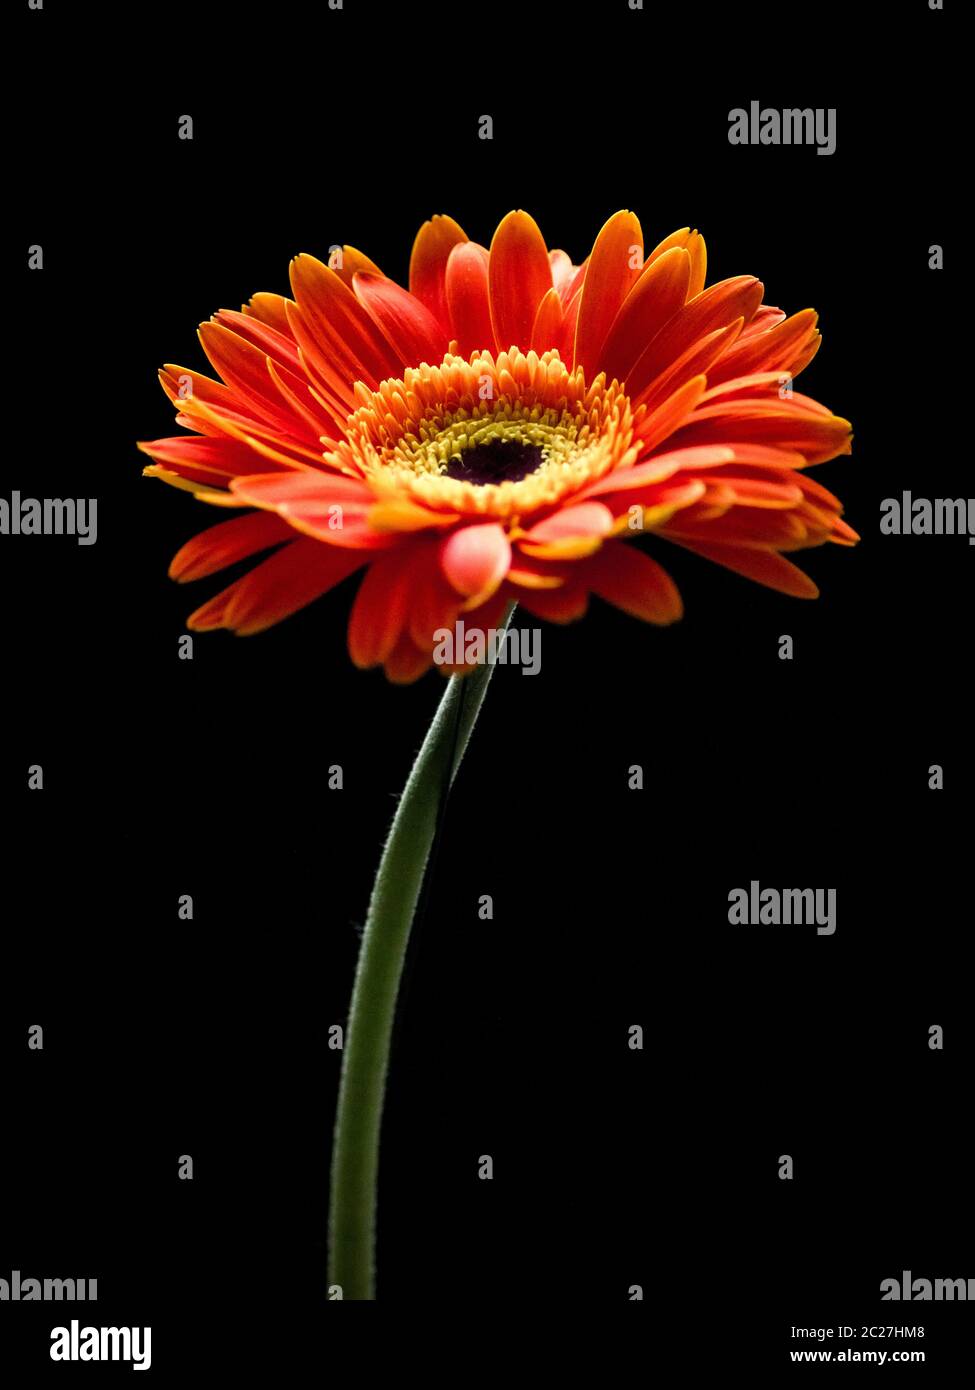 Beautiful red and orange gerbera flower isolated on a black background. Stock Photo